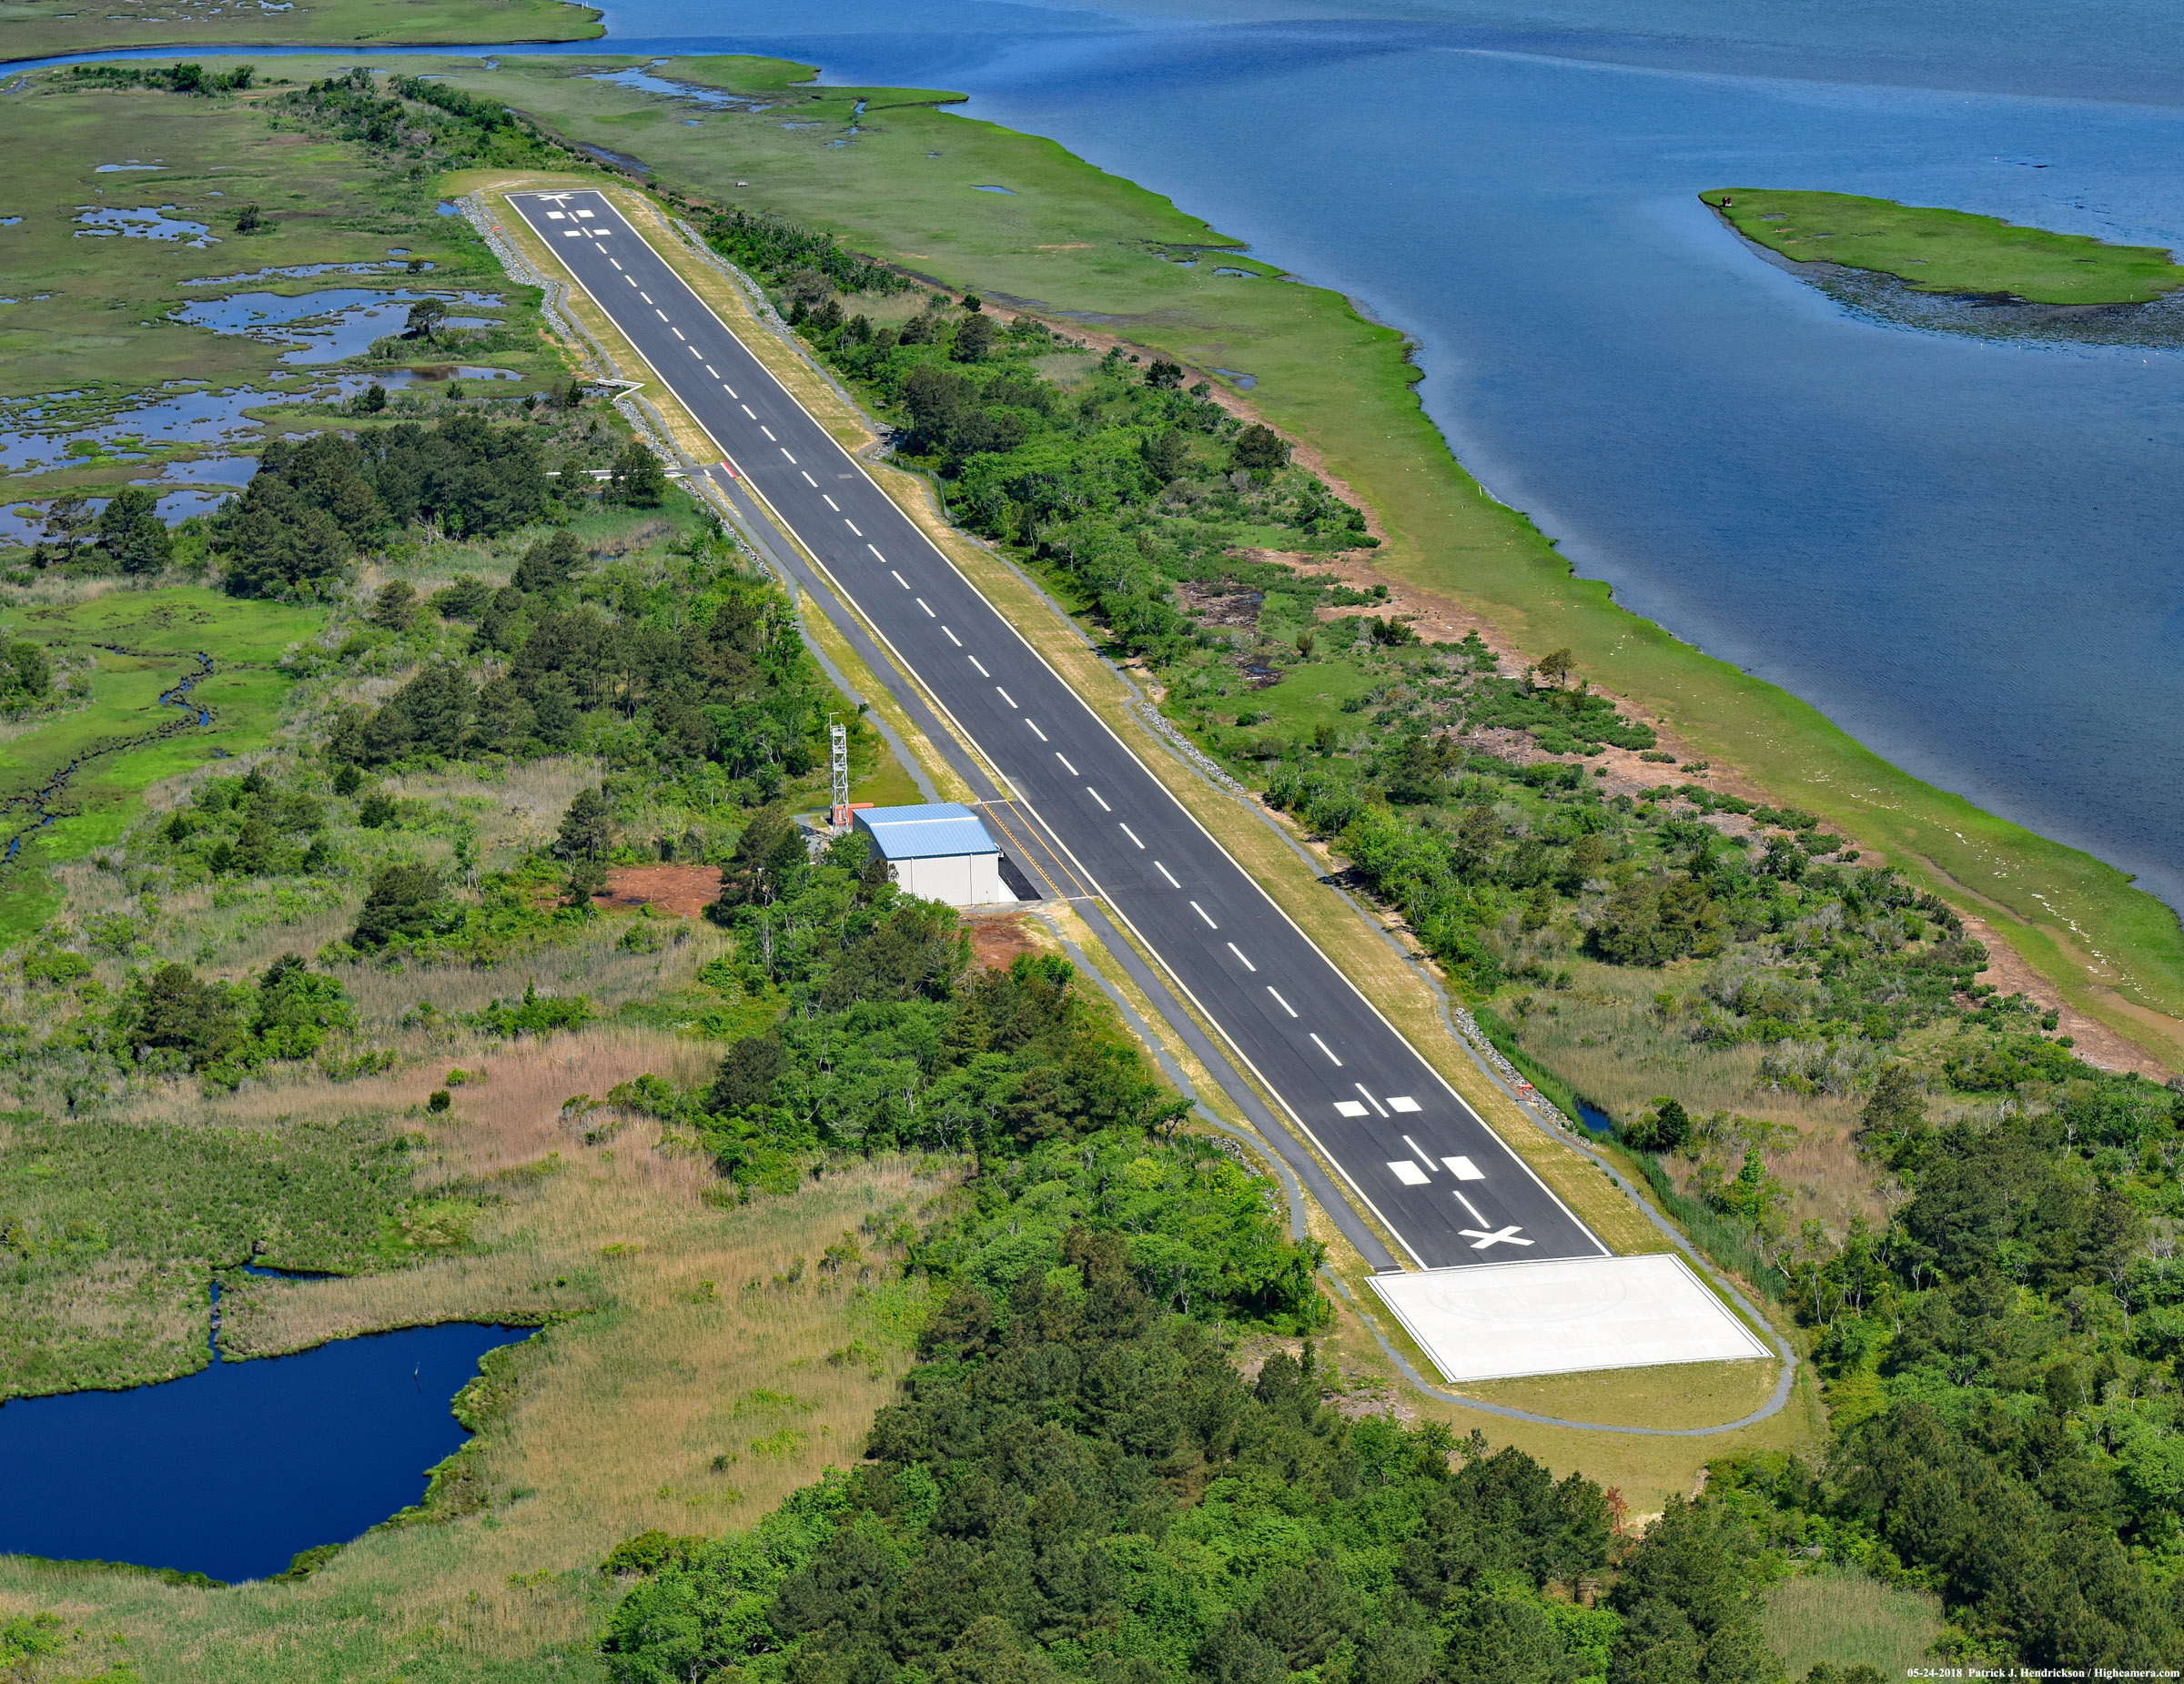 An east to west aerial photograph of the Unmanned Aerial System (UAS) Airstrip surrounded by vegetation and water, on the northern end of NASA Wallops Flight Facility's Wallops Island in Accomack County, Virginia. Photo courtesy of Patrick Hendrickson of HighCamera